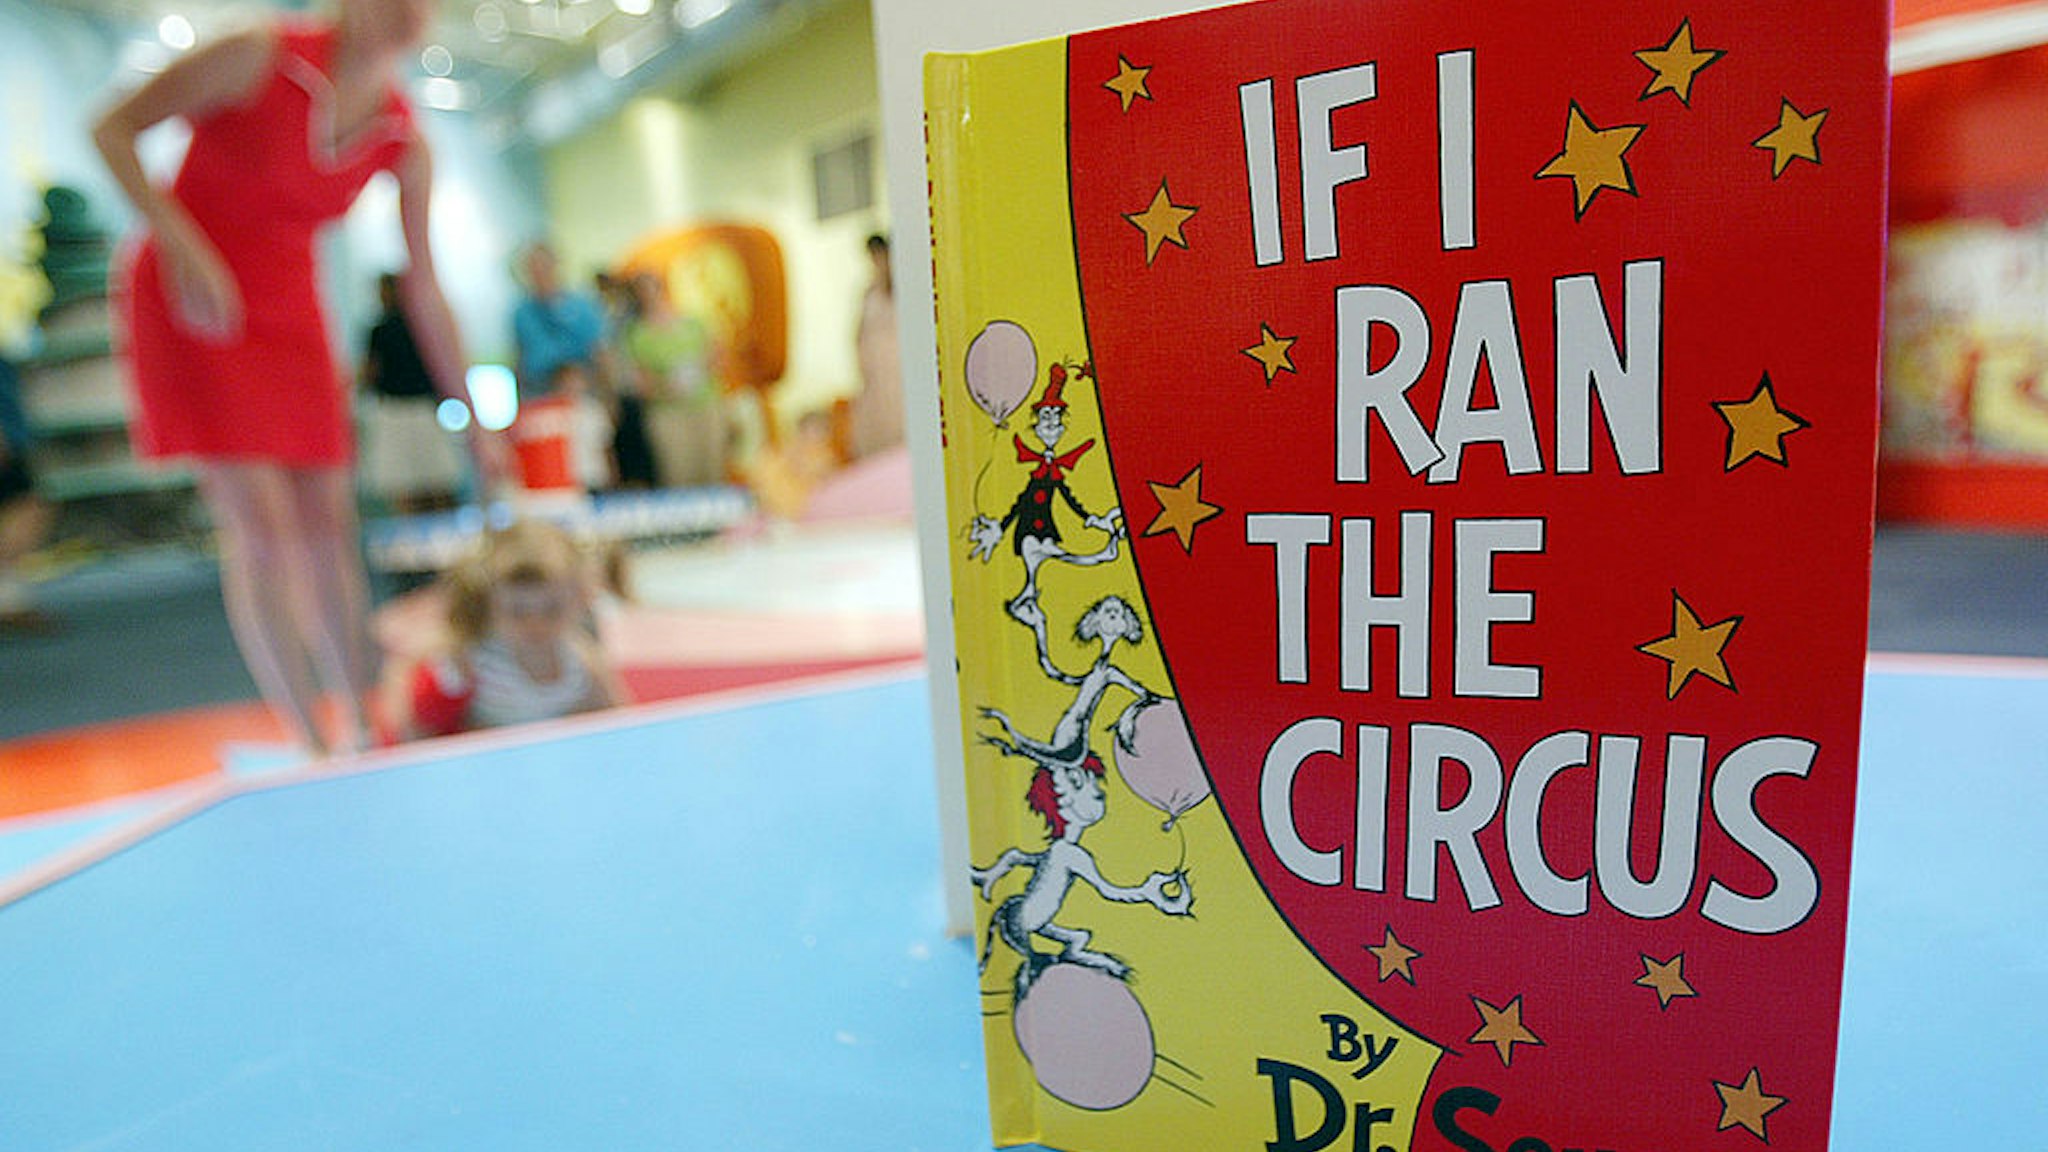 NEW YORK - JULY 6: A Dr. Seuss book is seen as children play during a press preview of an interactive exhibition dedicated to Dr. Seuss at the Children's Museum of Manhattan July 6, 2004 in New York City. The 4,000 square-foot exhibit is titled, 'Oh Suess! Off to Great Places' and will remain open at the museum until July 2005.